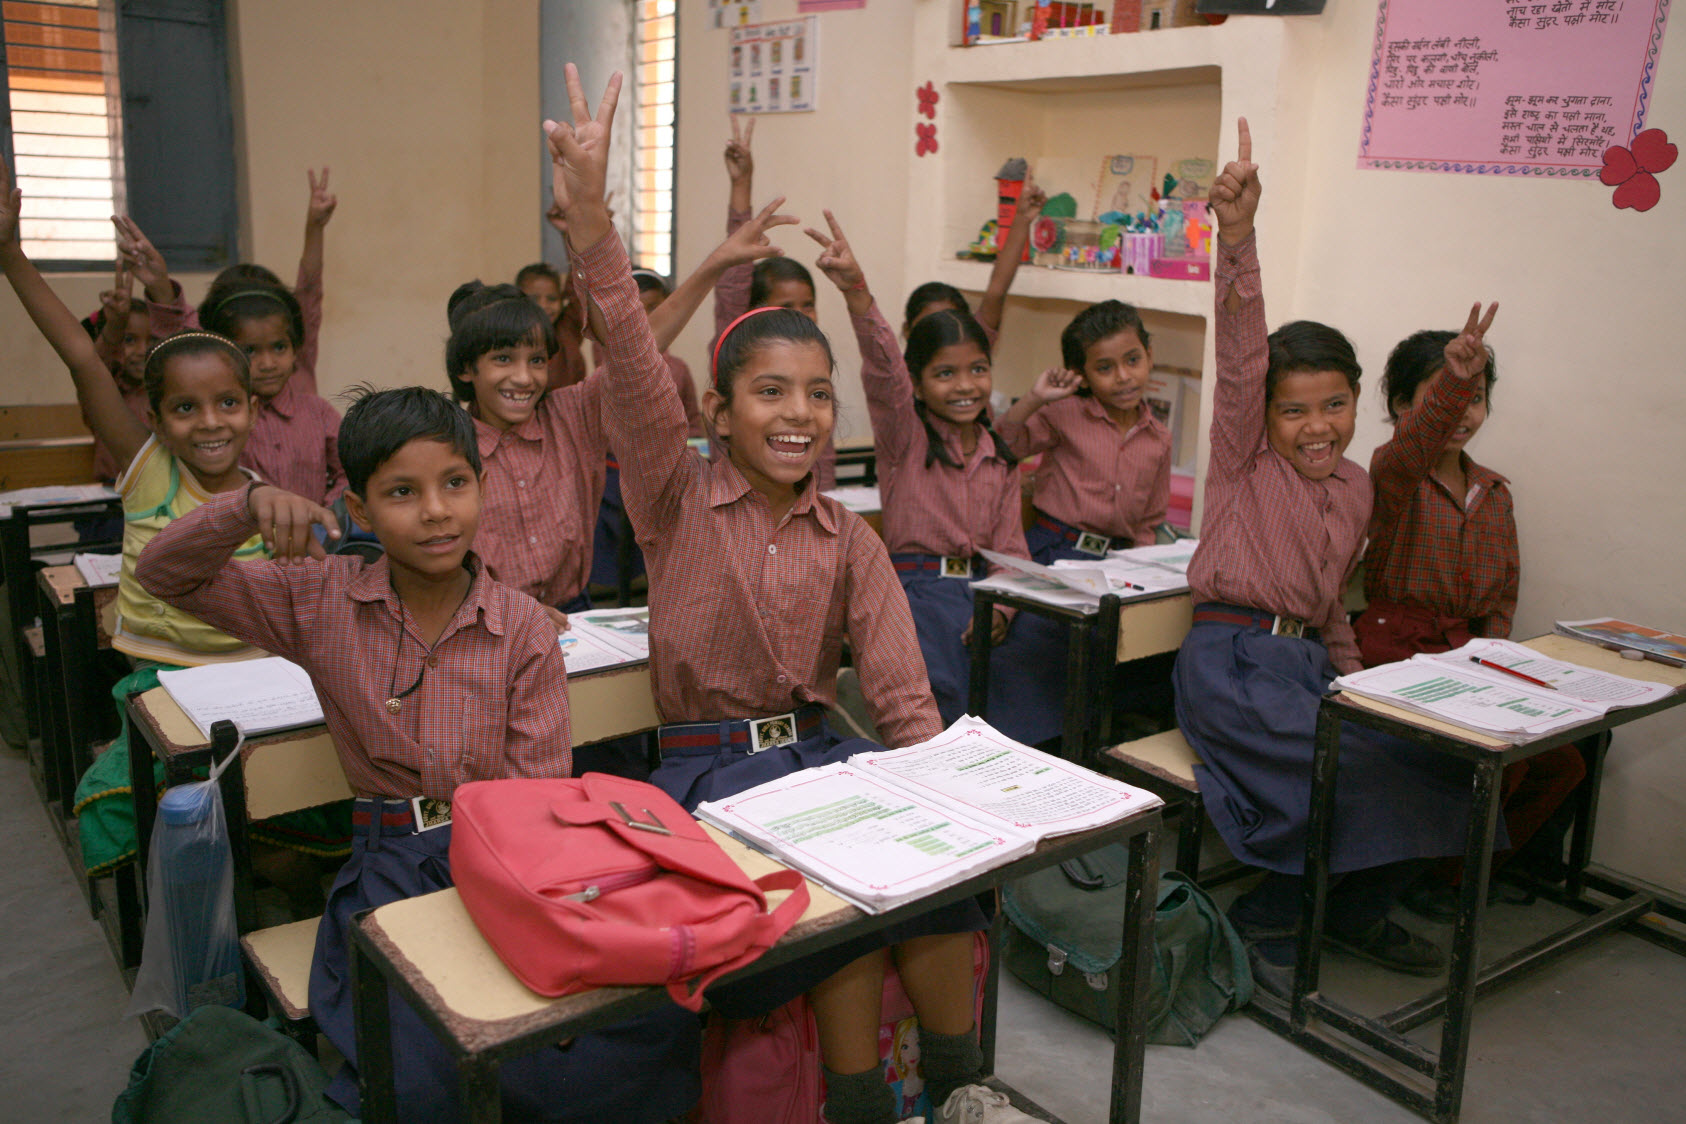 Students in Gurgaon are happy about the opportunity to study in newly renovated facilities